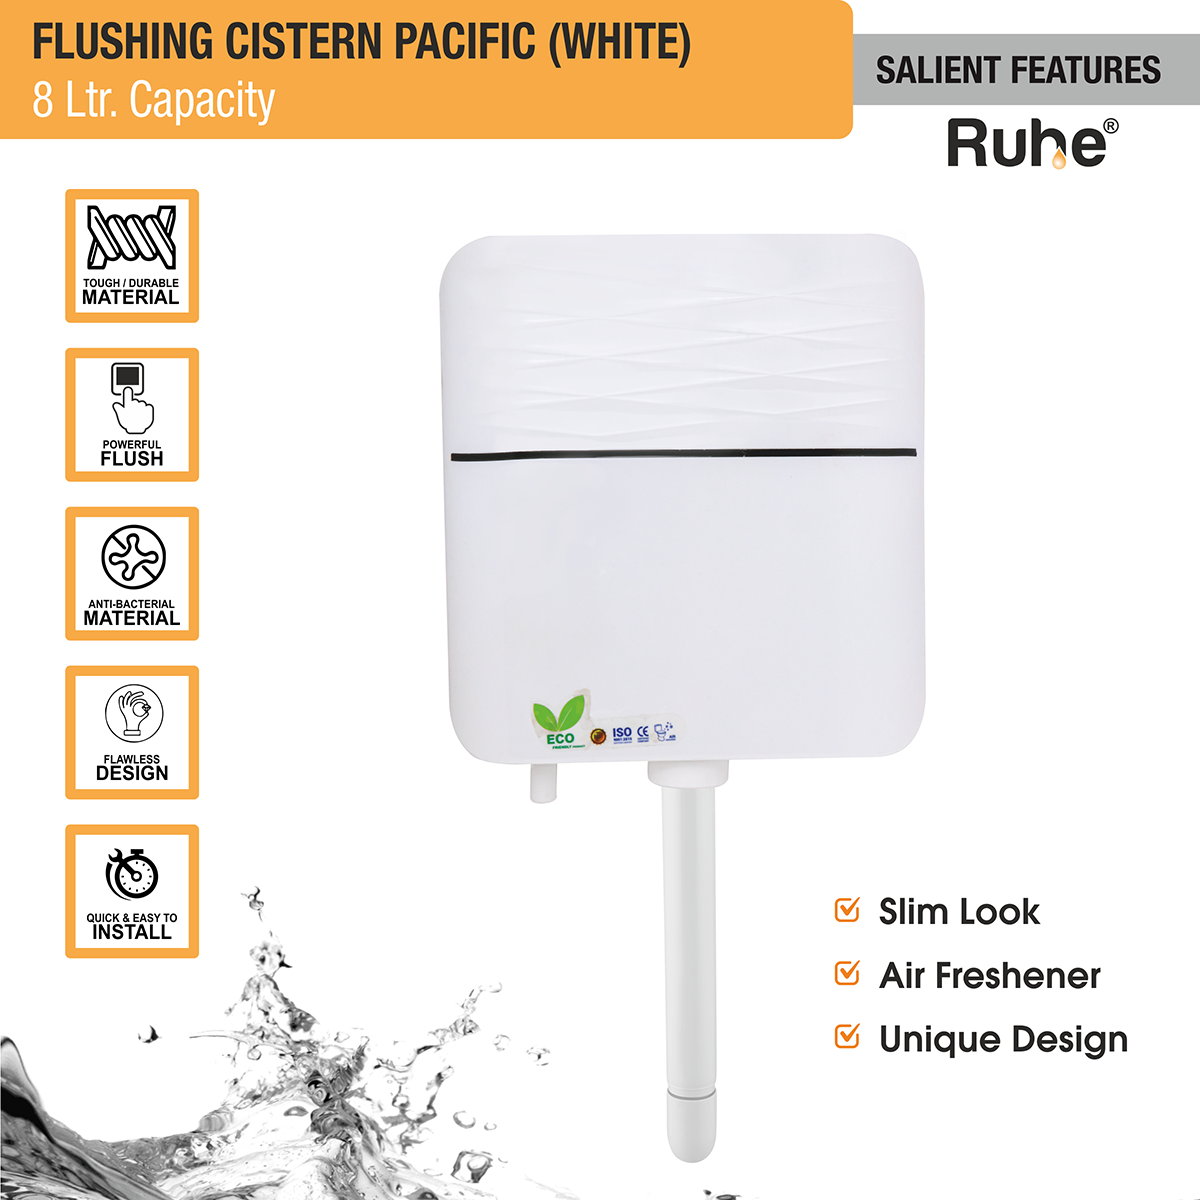 Pacific Flushing Cistern 8 Ltr (White) features and benefits